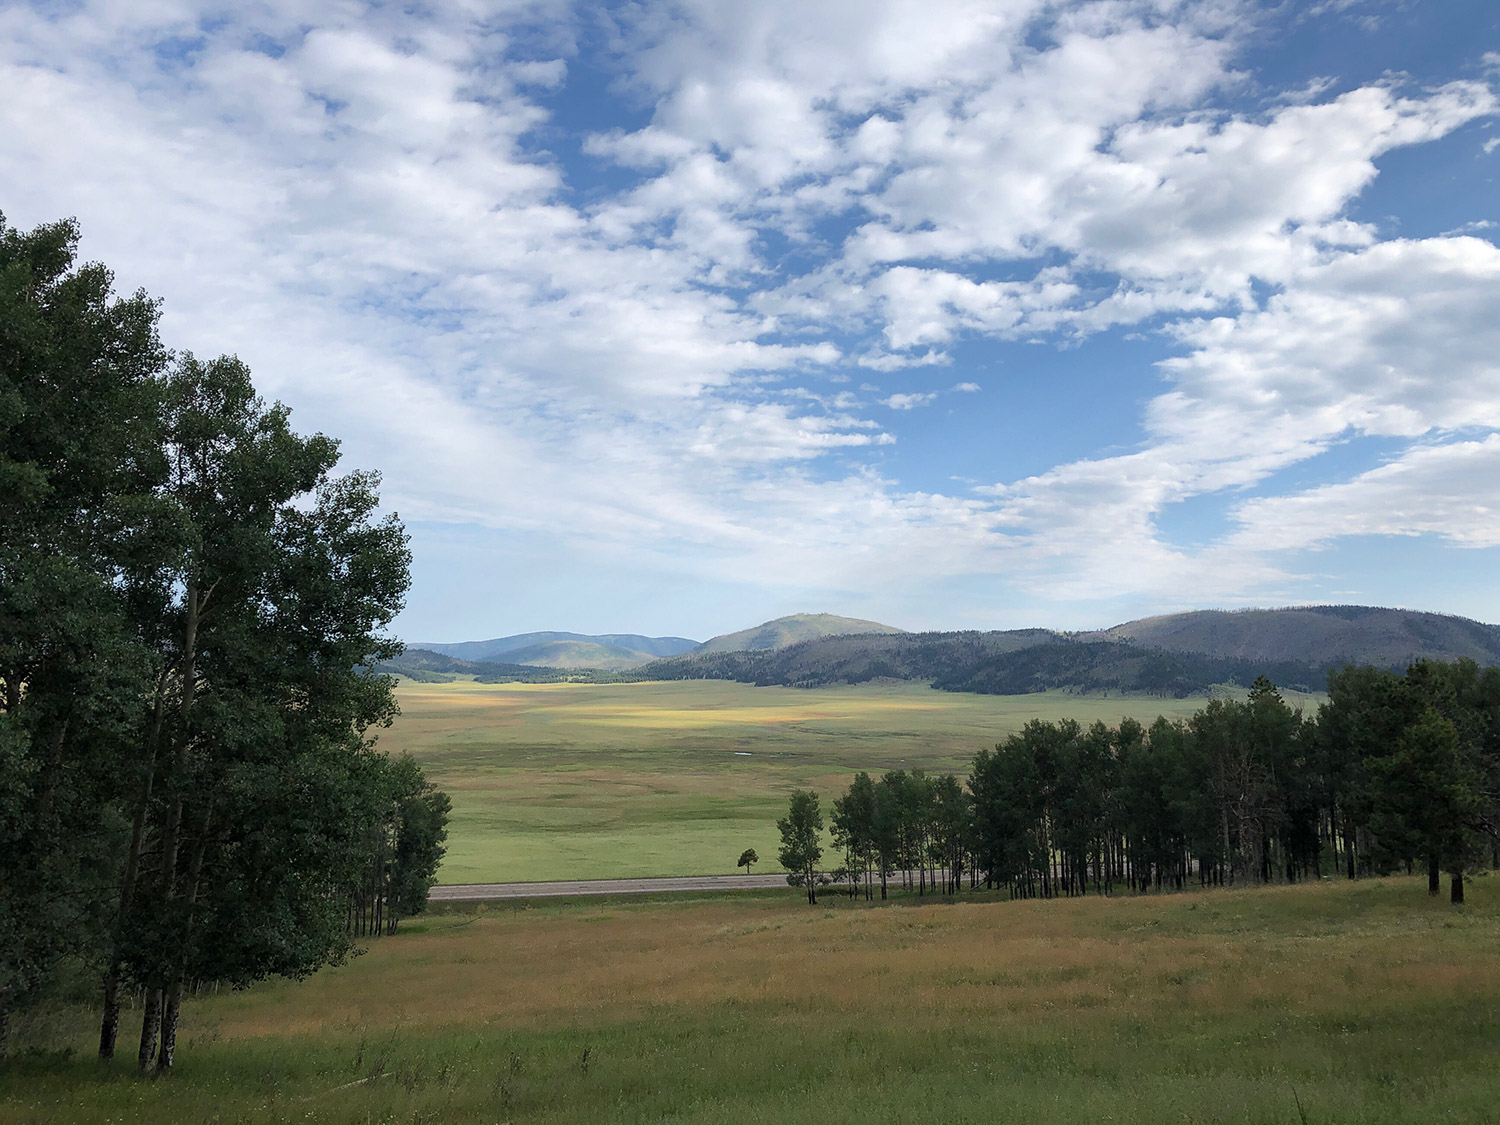 Hiking Trails in Valles Caldera – a book by Coco Rae